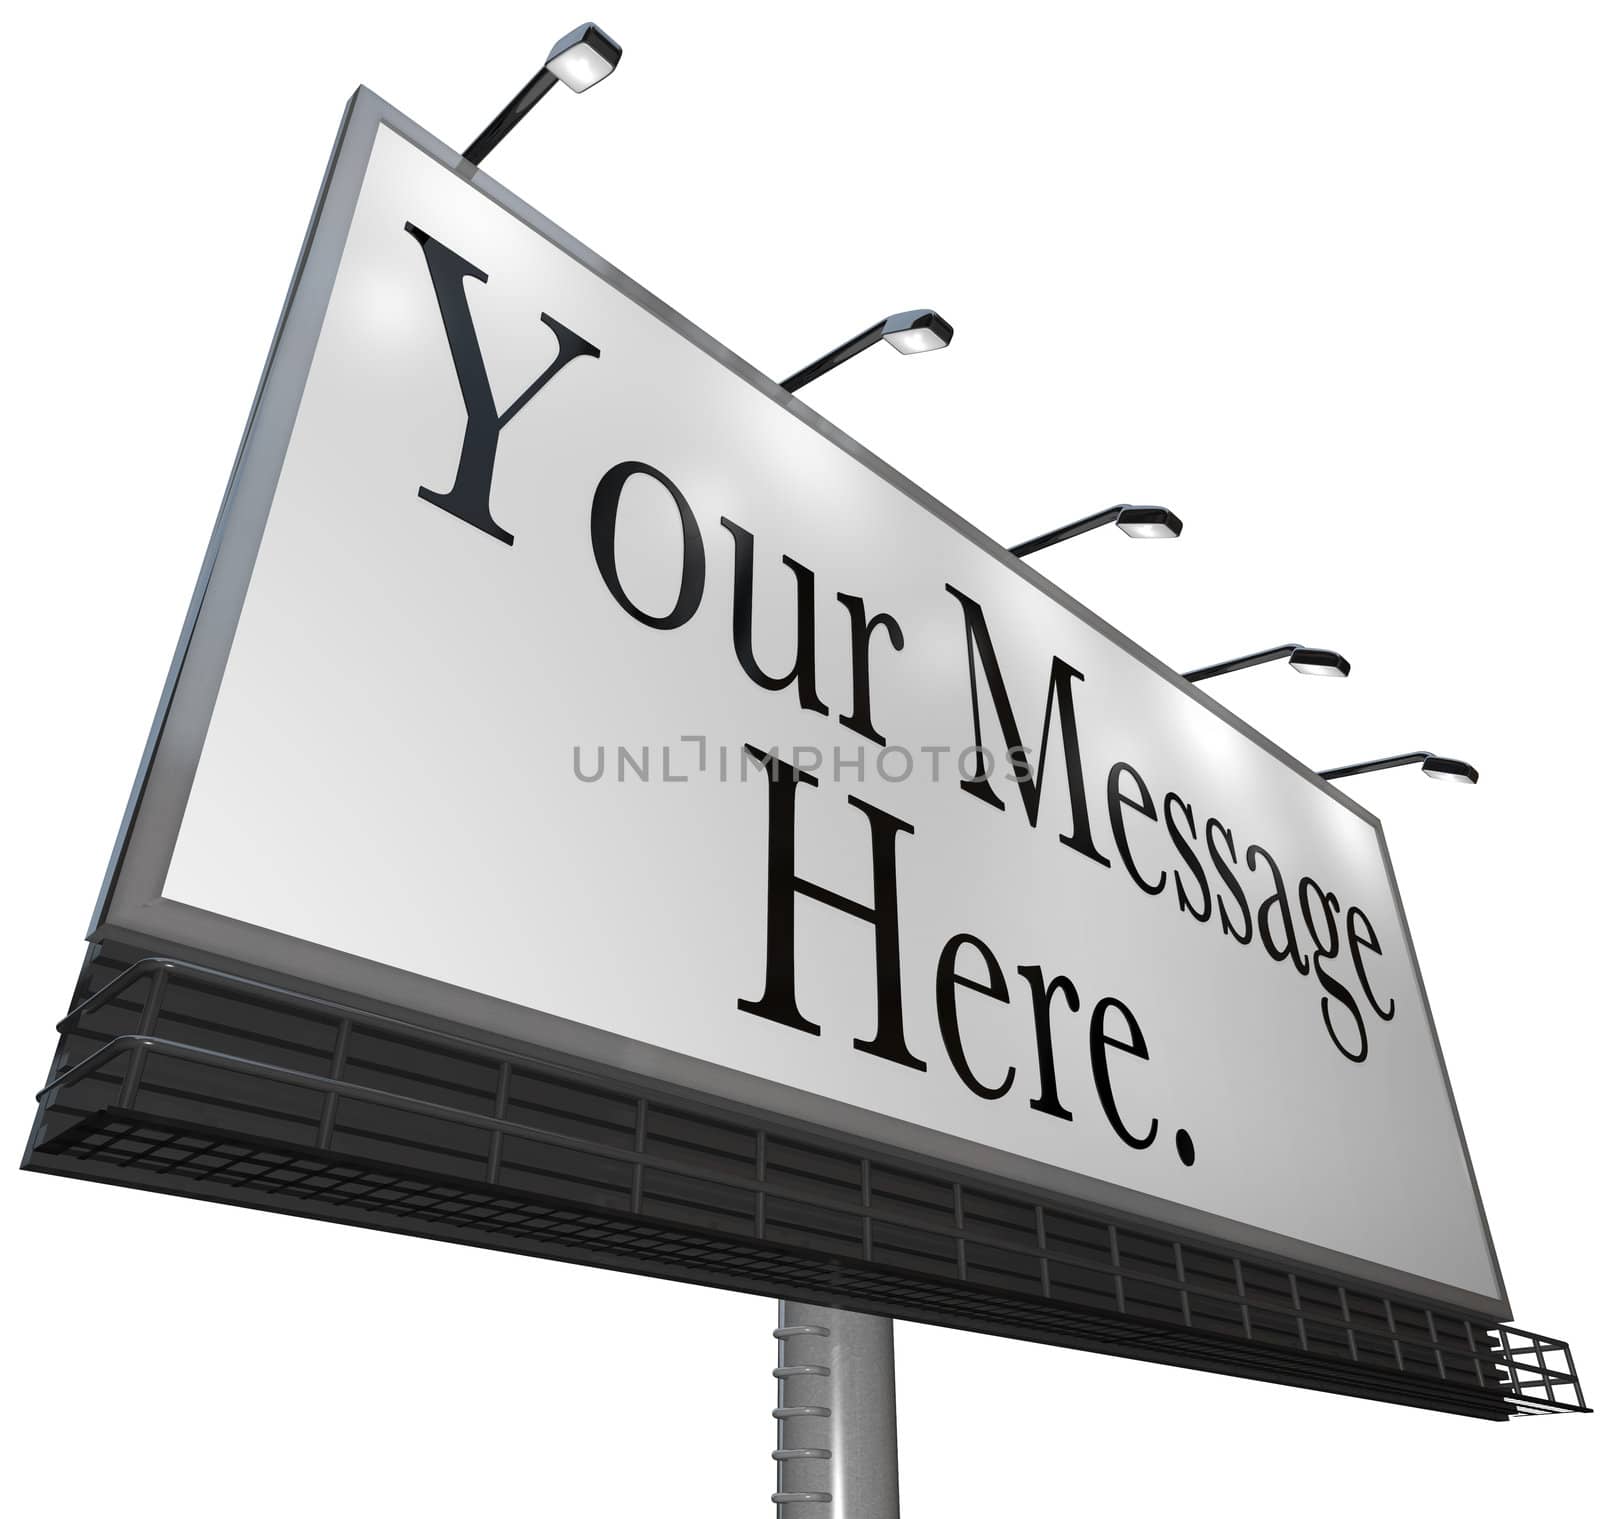 Your Message Here appears on a white canvass on an outdoor billboard for you to advertise your product or service and attract new customers